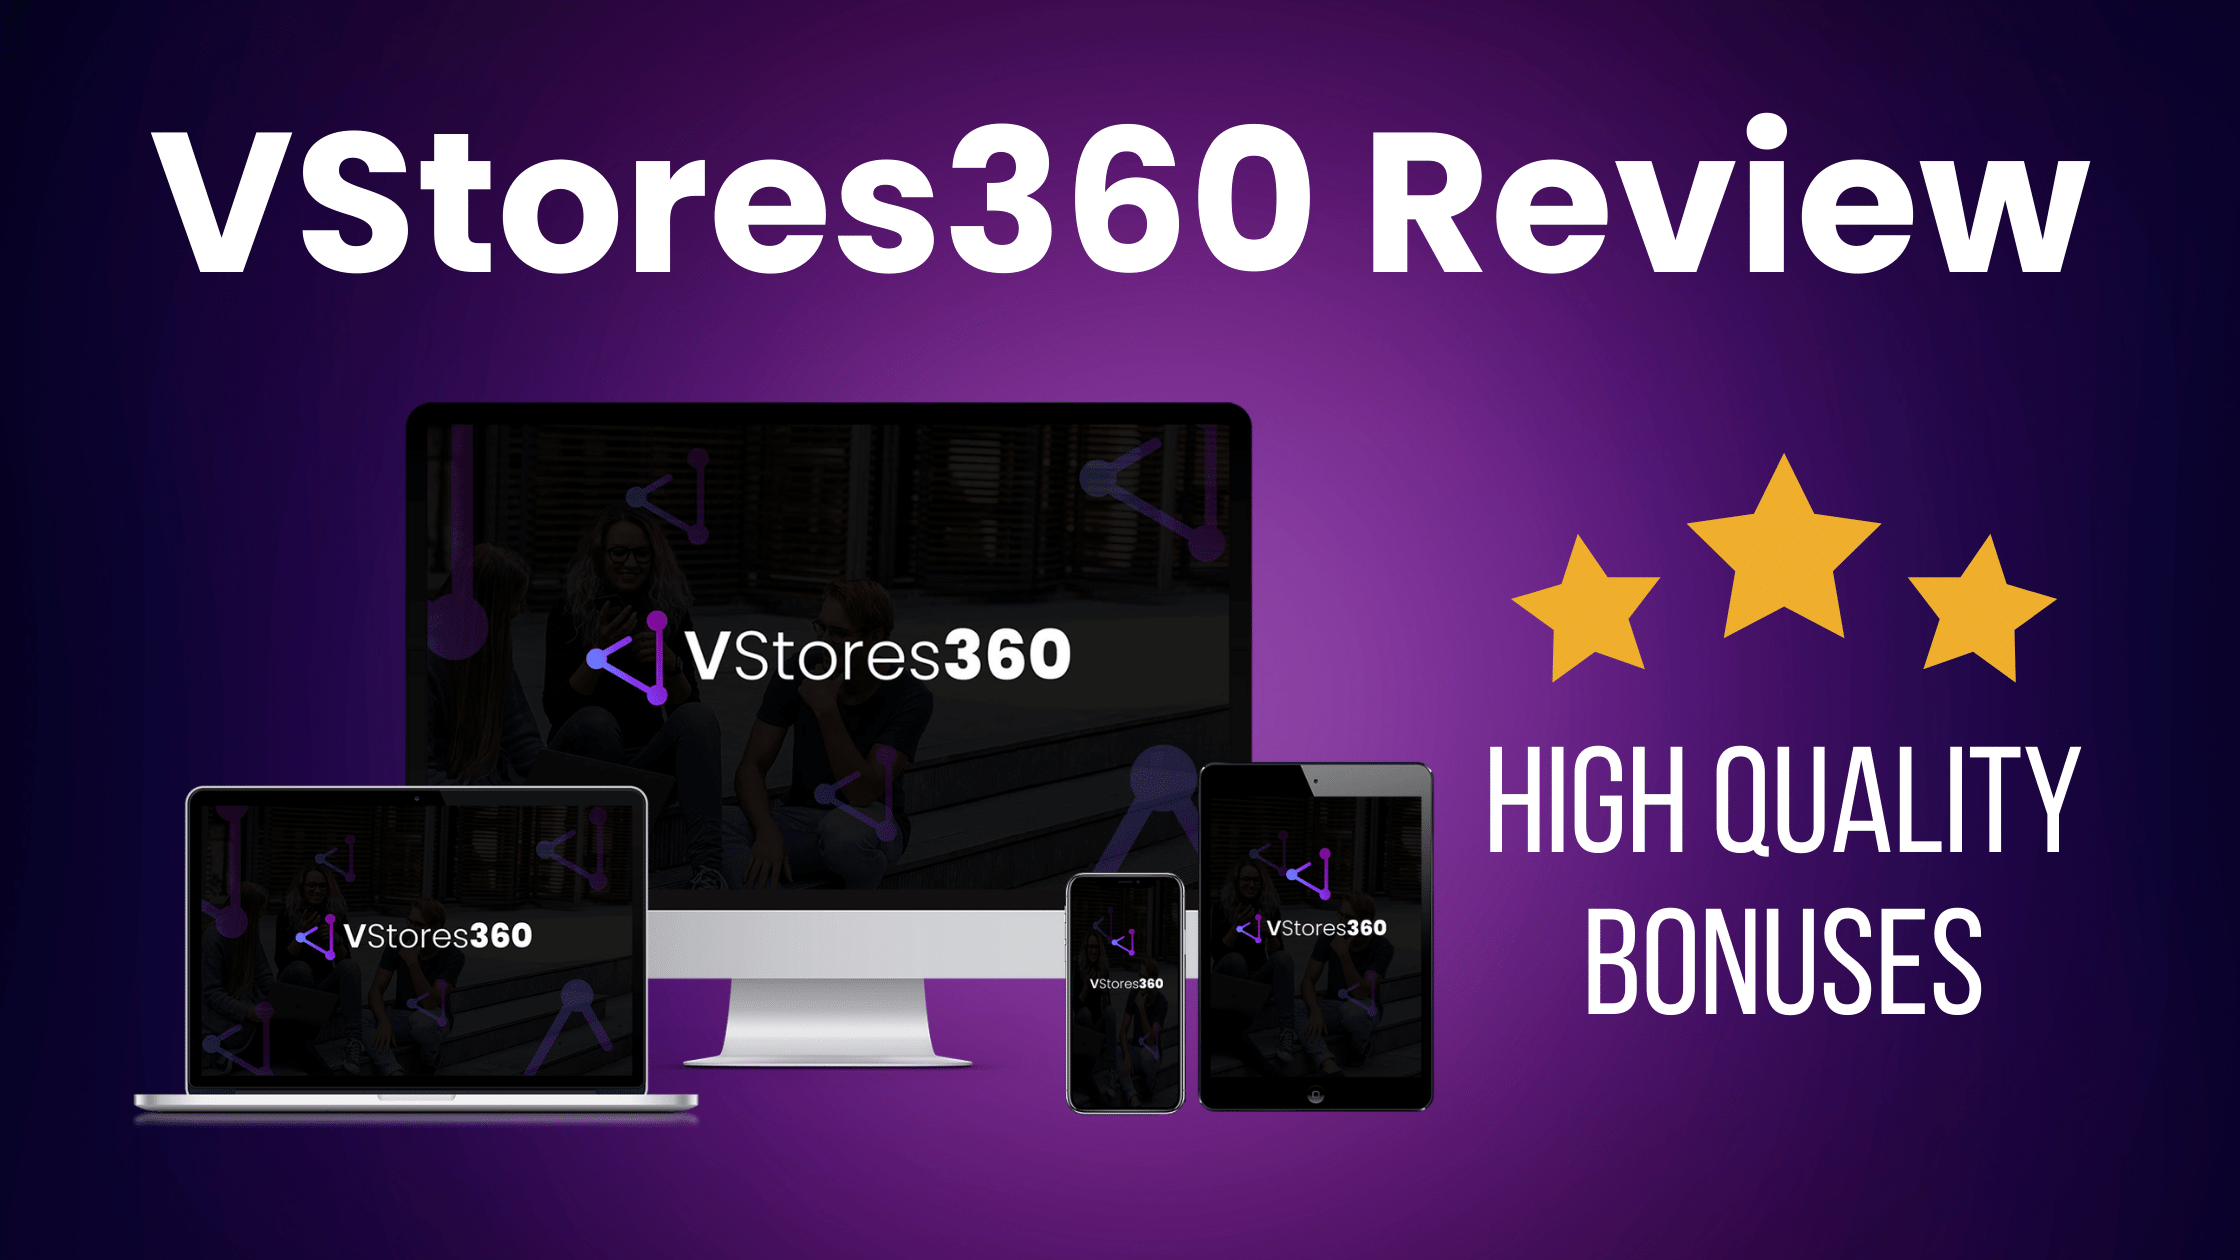 VStores360 Review